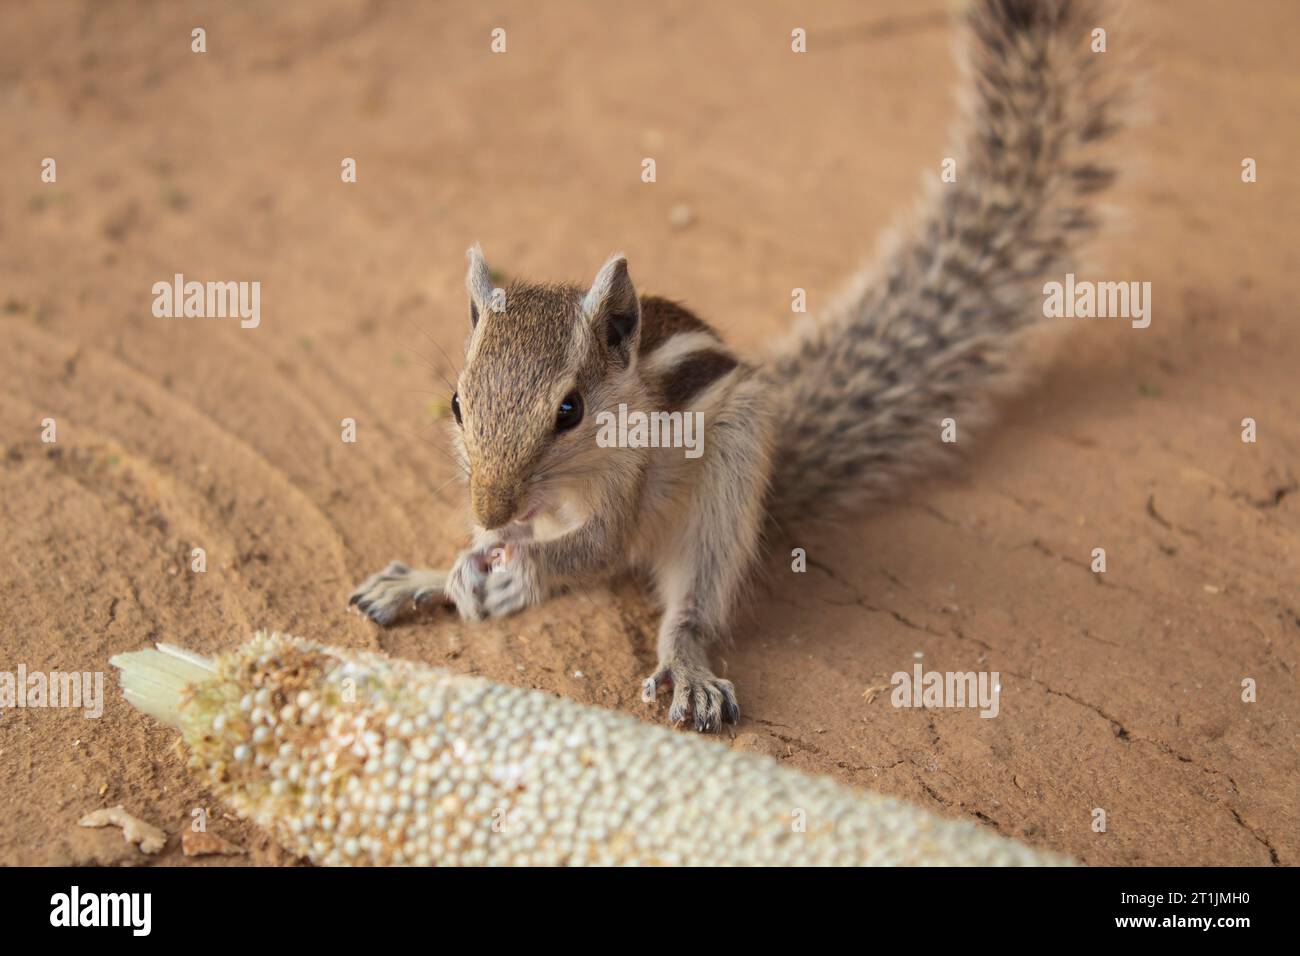 Squirrel eating millet on the ground in the park, India. Stock Photo